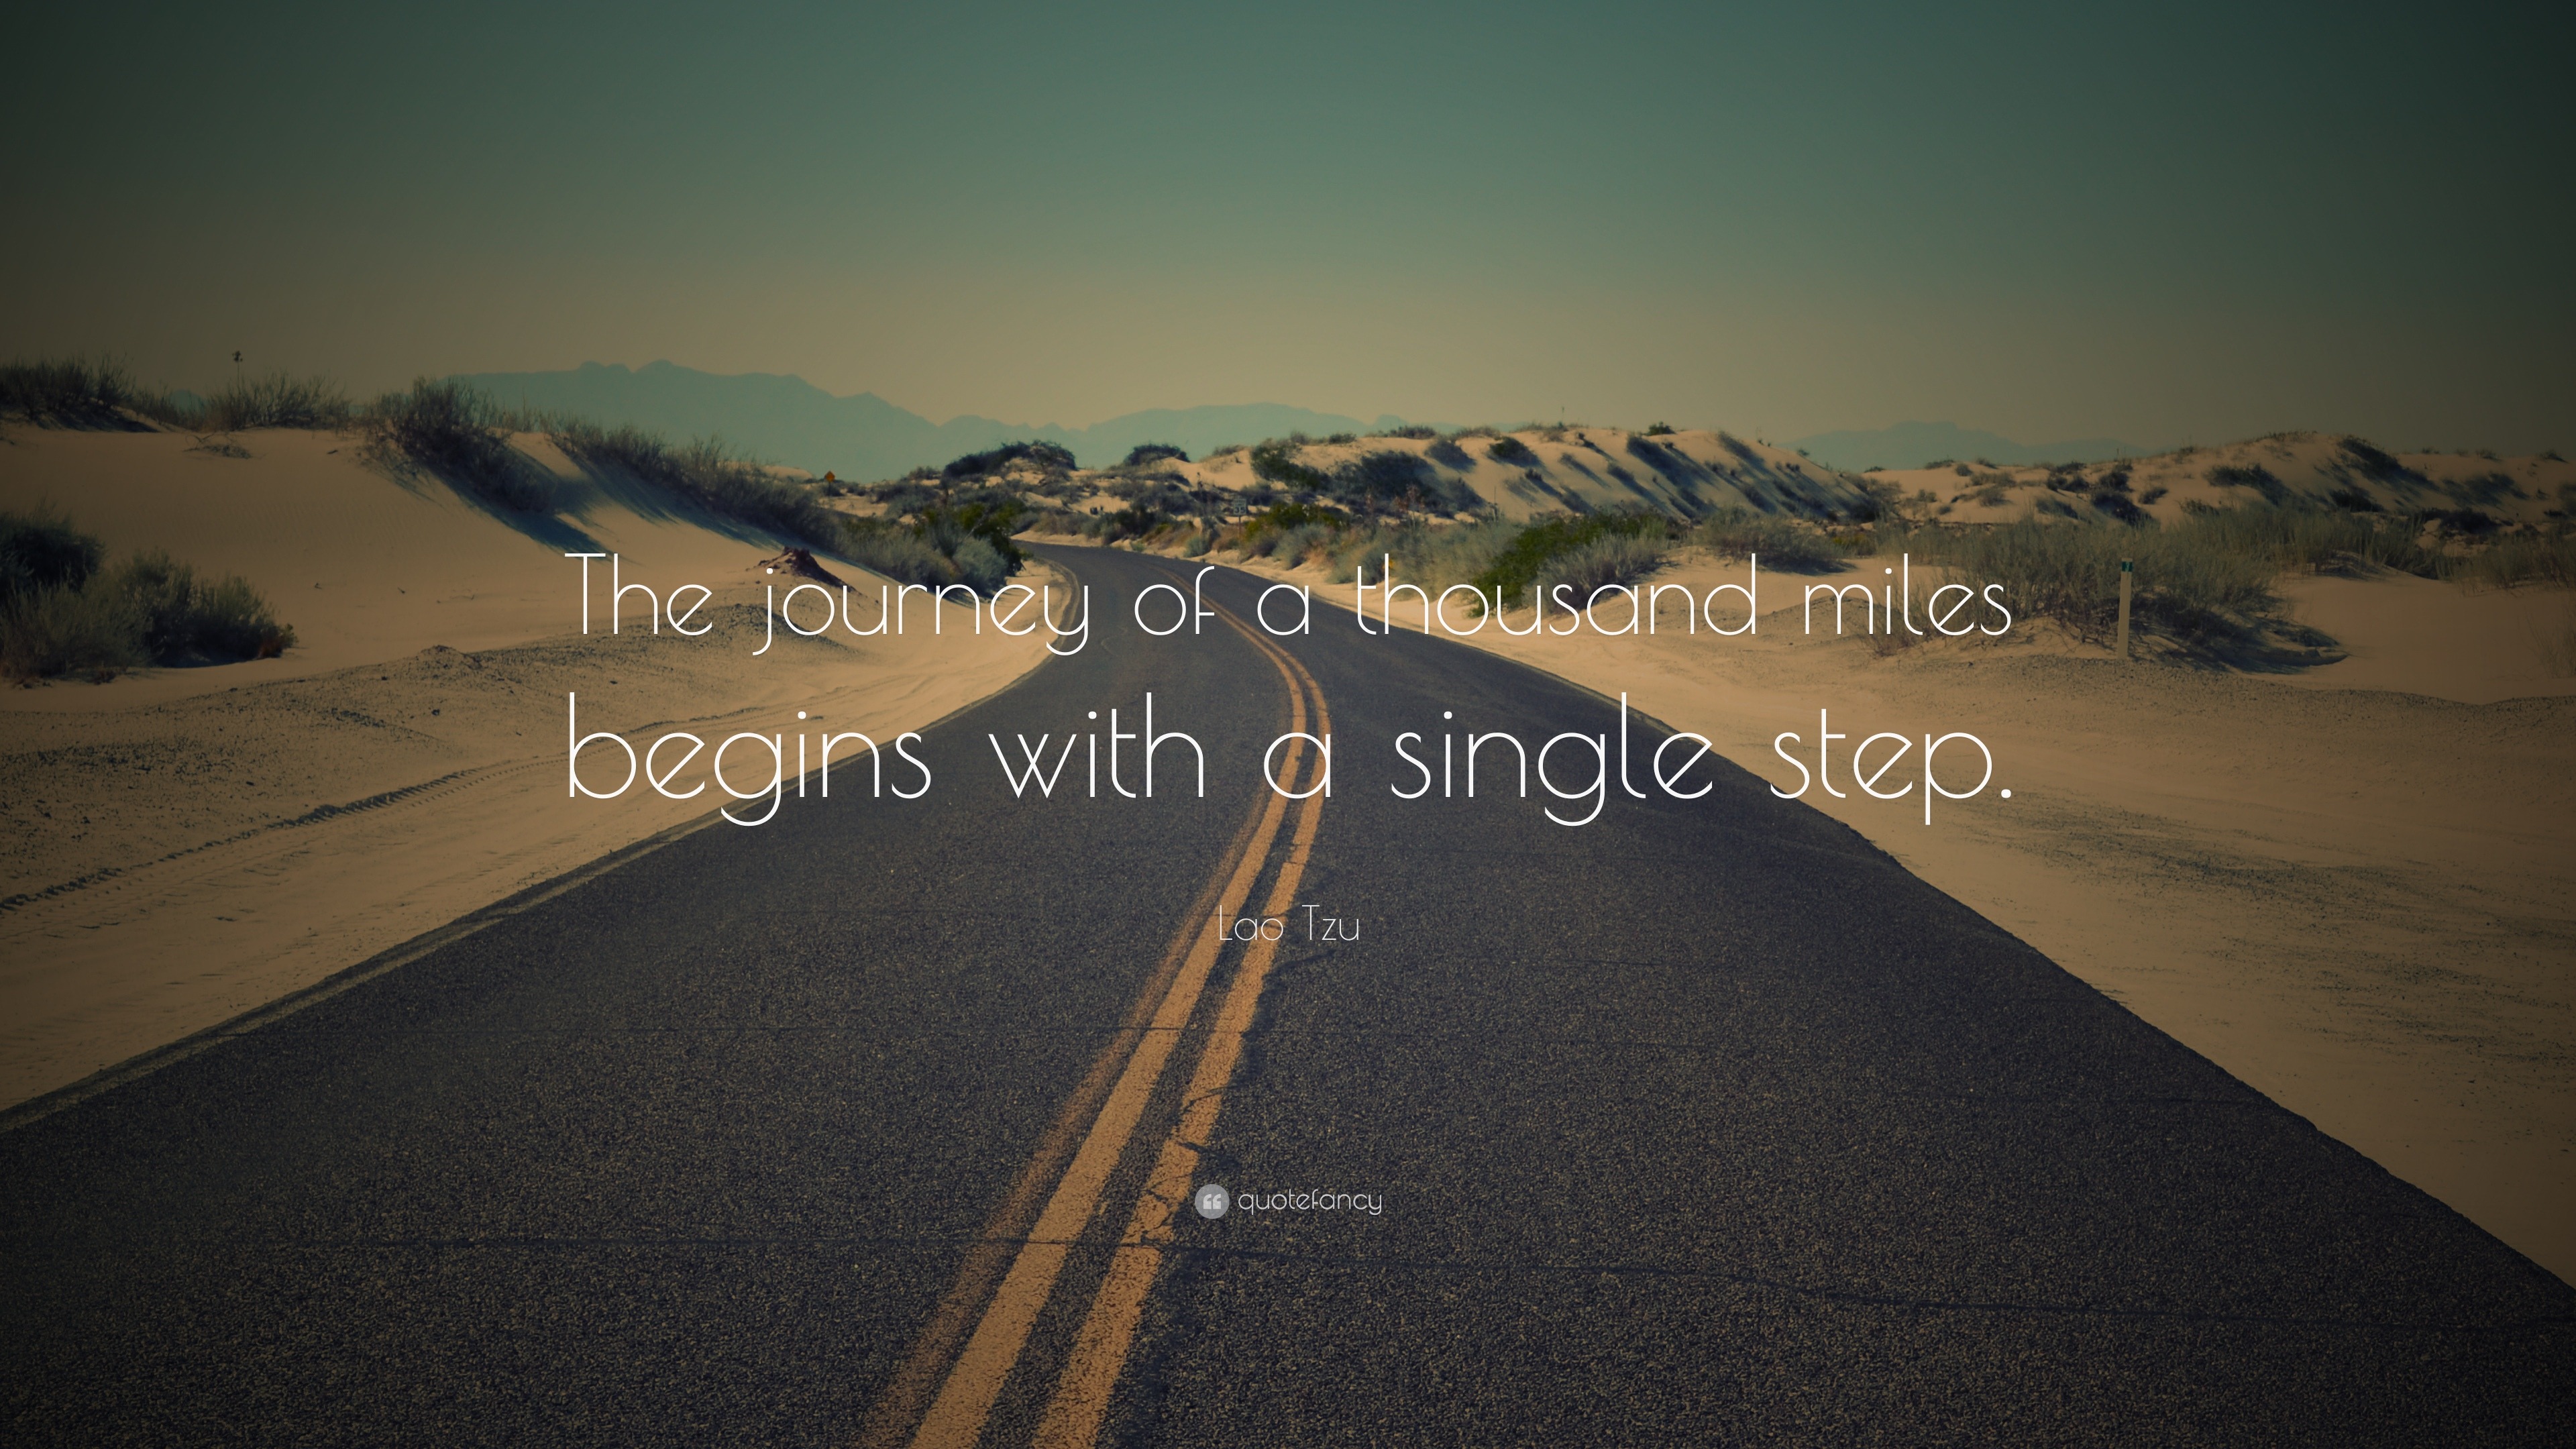 a thousand mile journey begins with one step